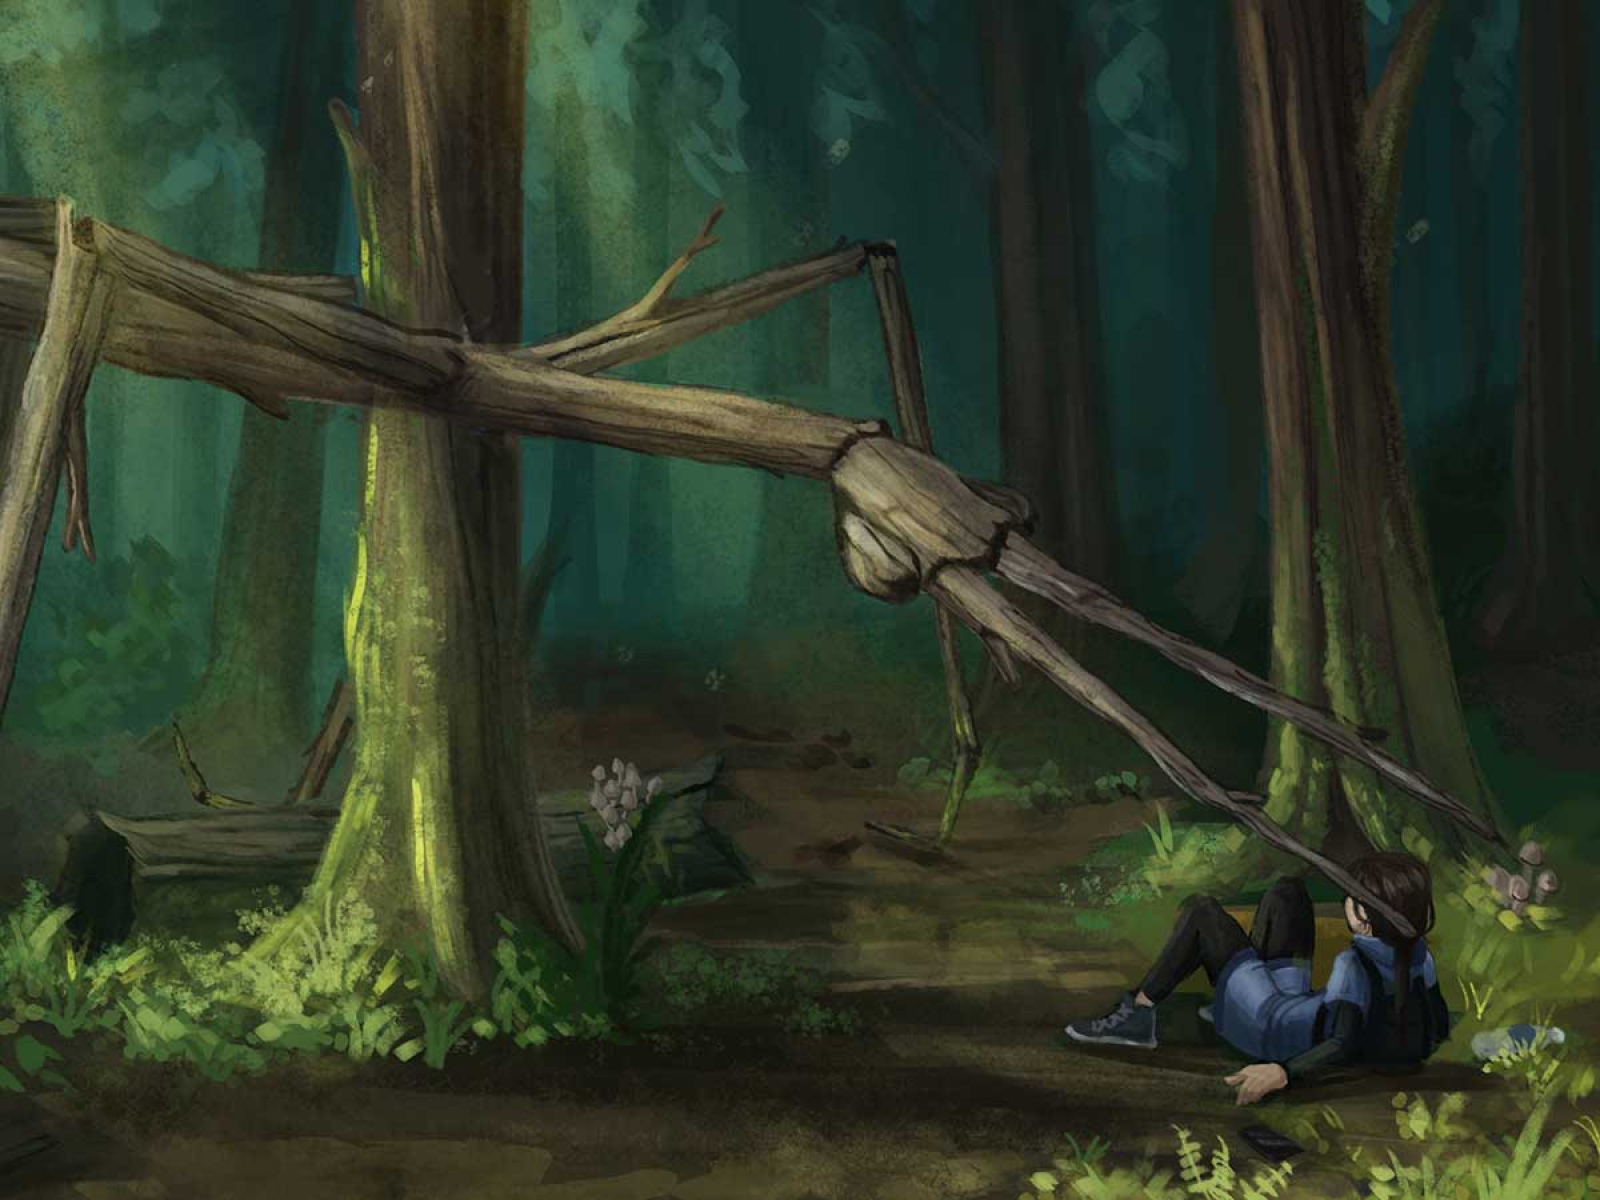 A child is approached by a giant stick bug in a forest.